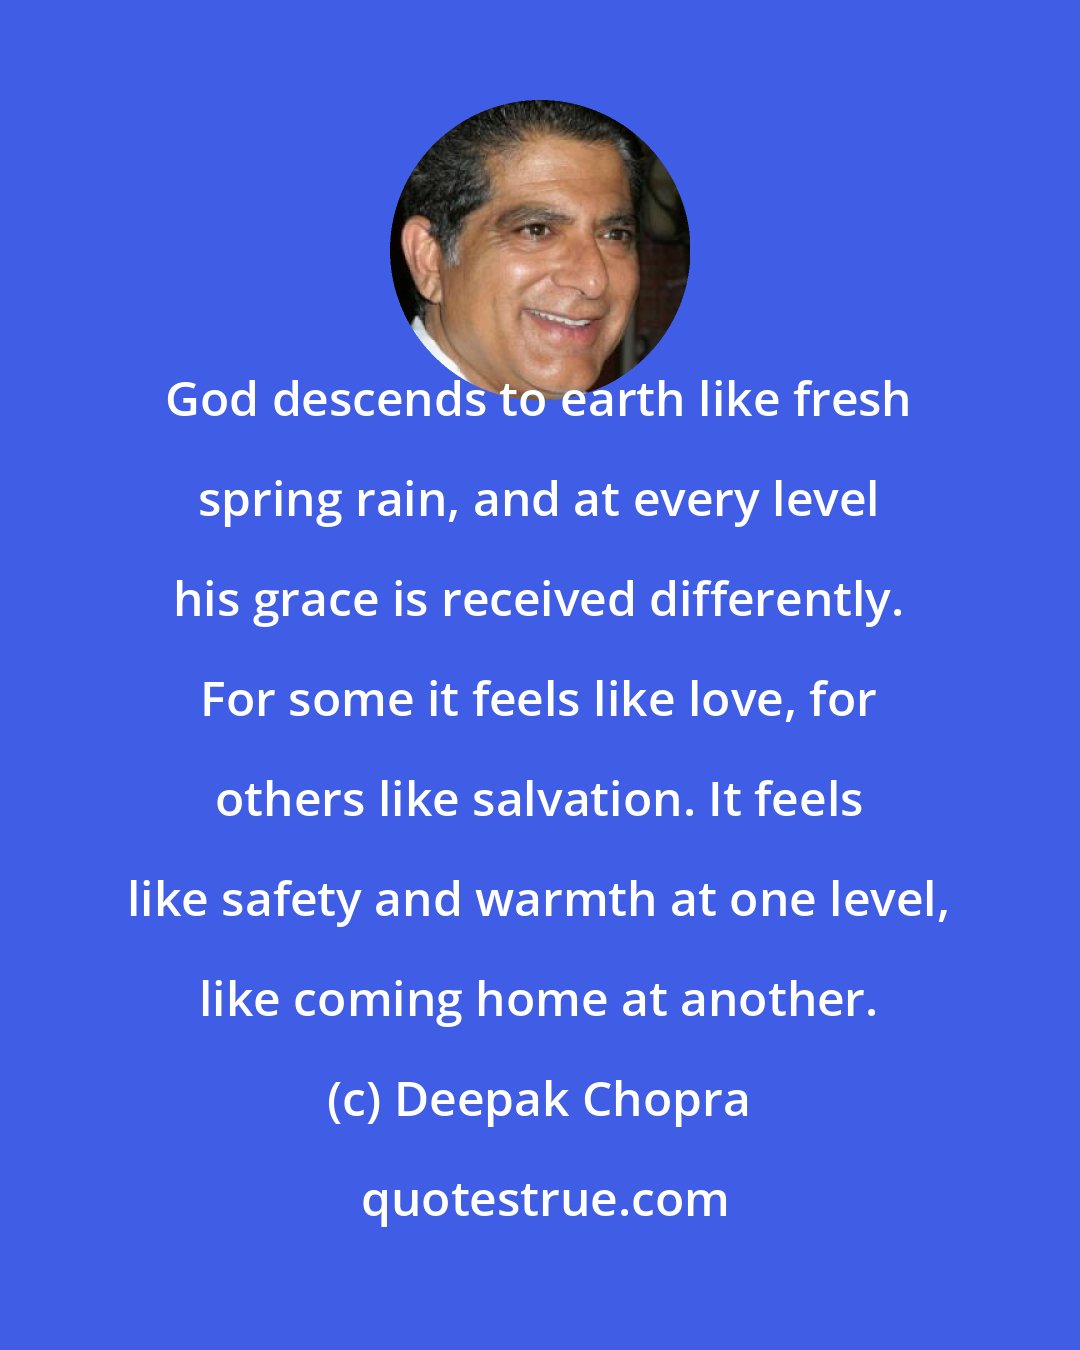 Deepak Chopra: God descends to earth like fresh spring rain, and at every level his grace is received differently. For some it feels like love, for others like salvation. It feels like safety and warmth at one level, like coming home at another.